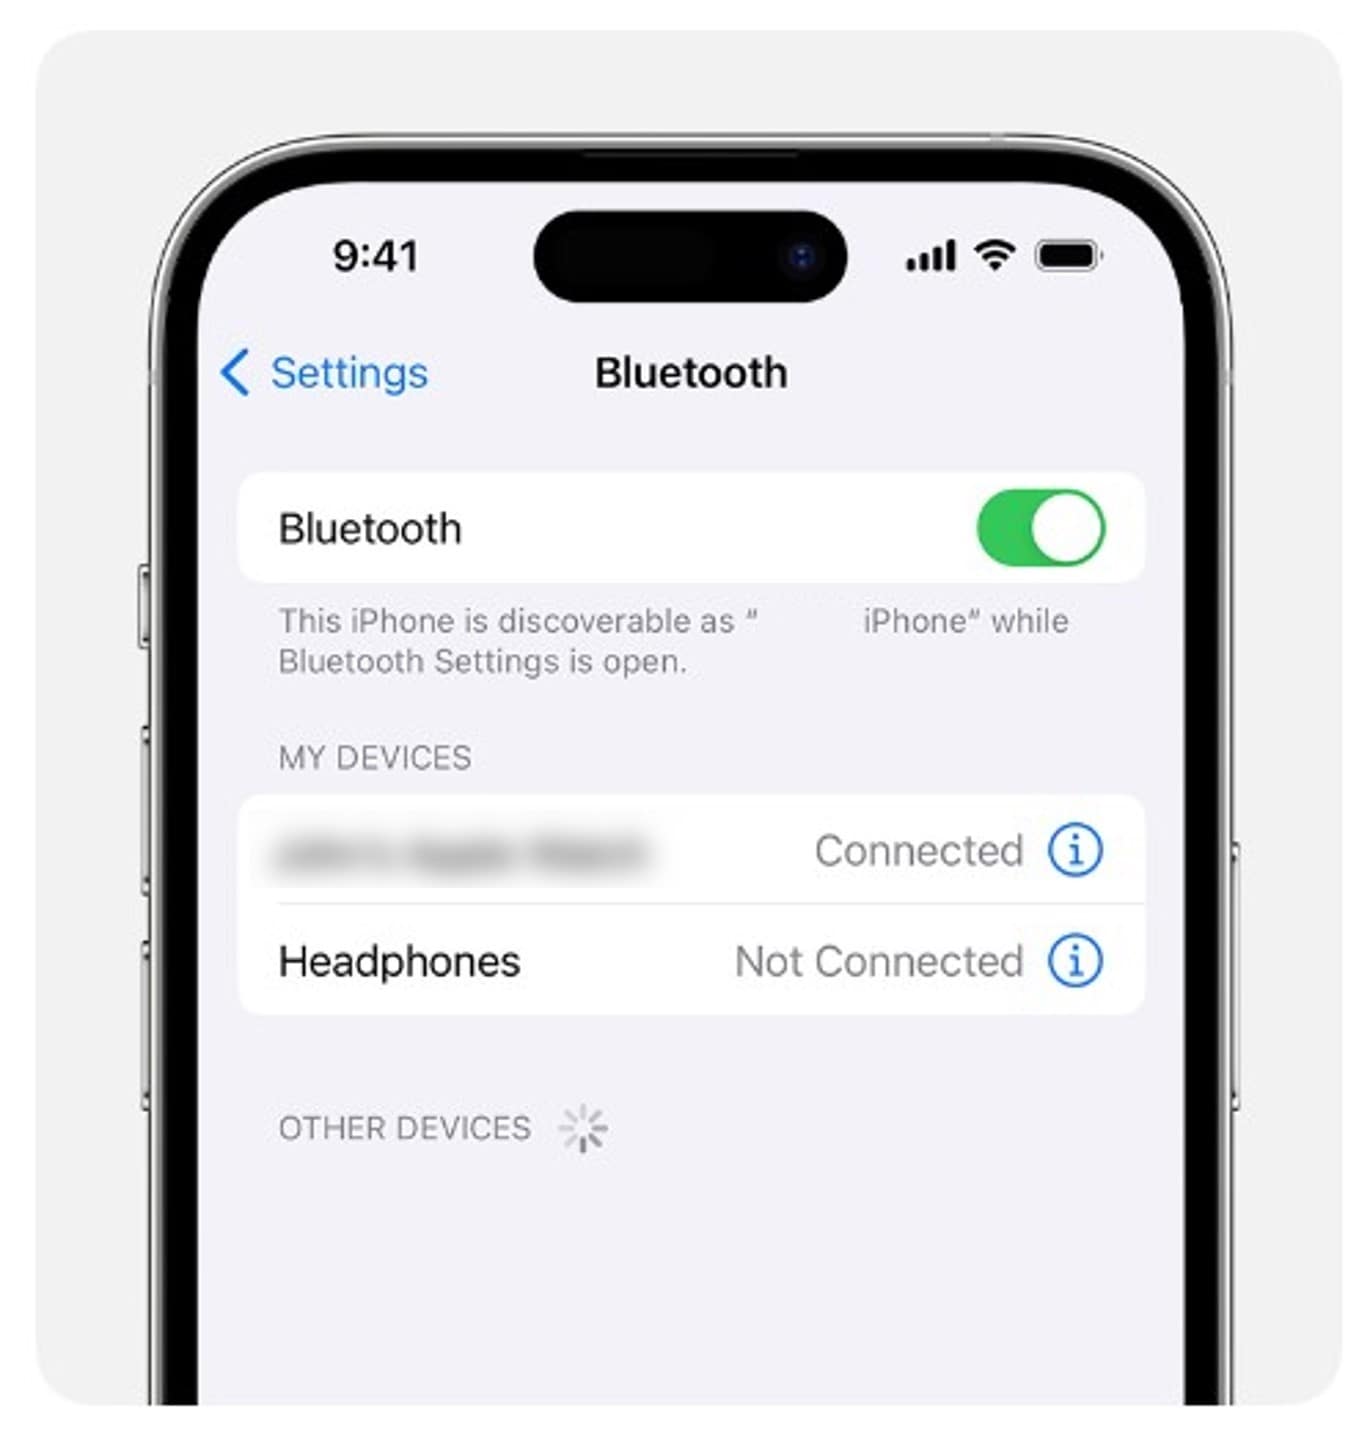 connected bluetooth devices to iphone